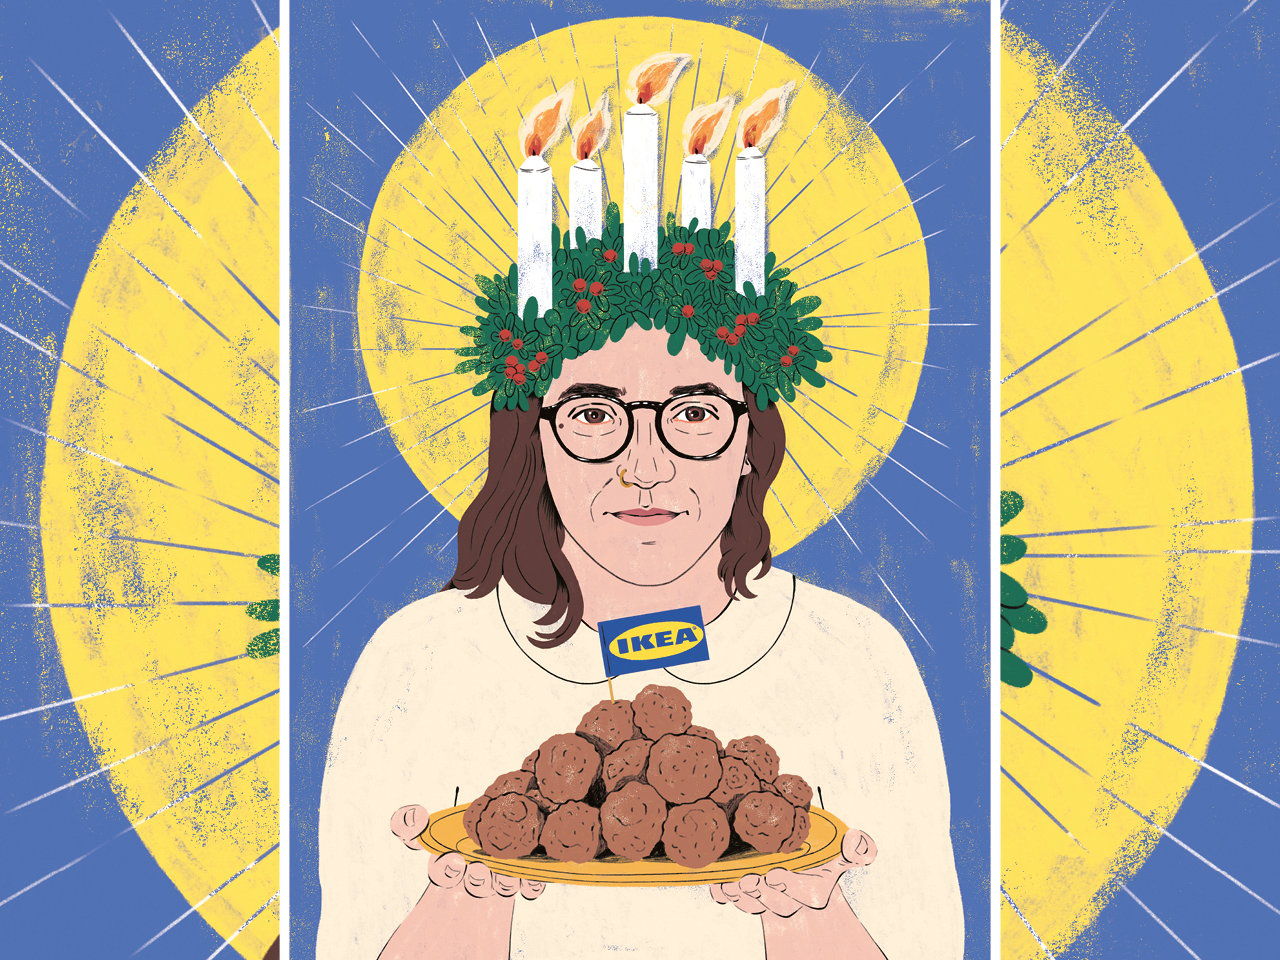 An illustration of the author holding a plate of meatballs, dressed as Sankta Lucia